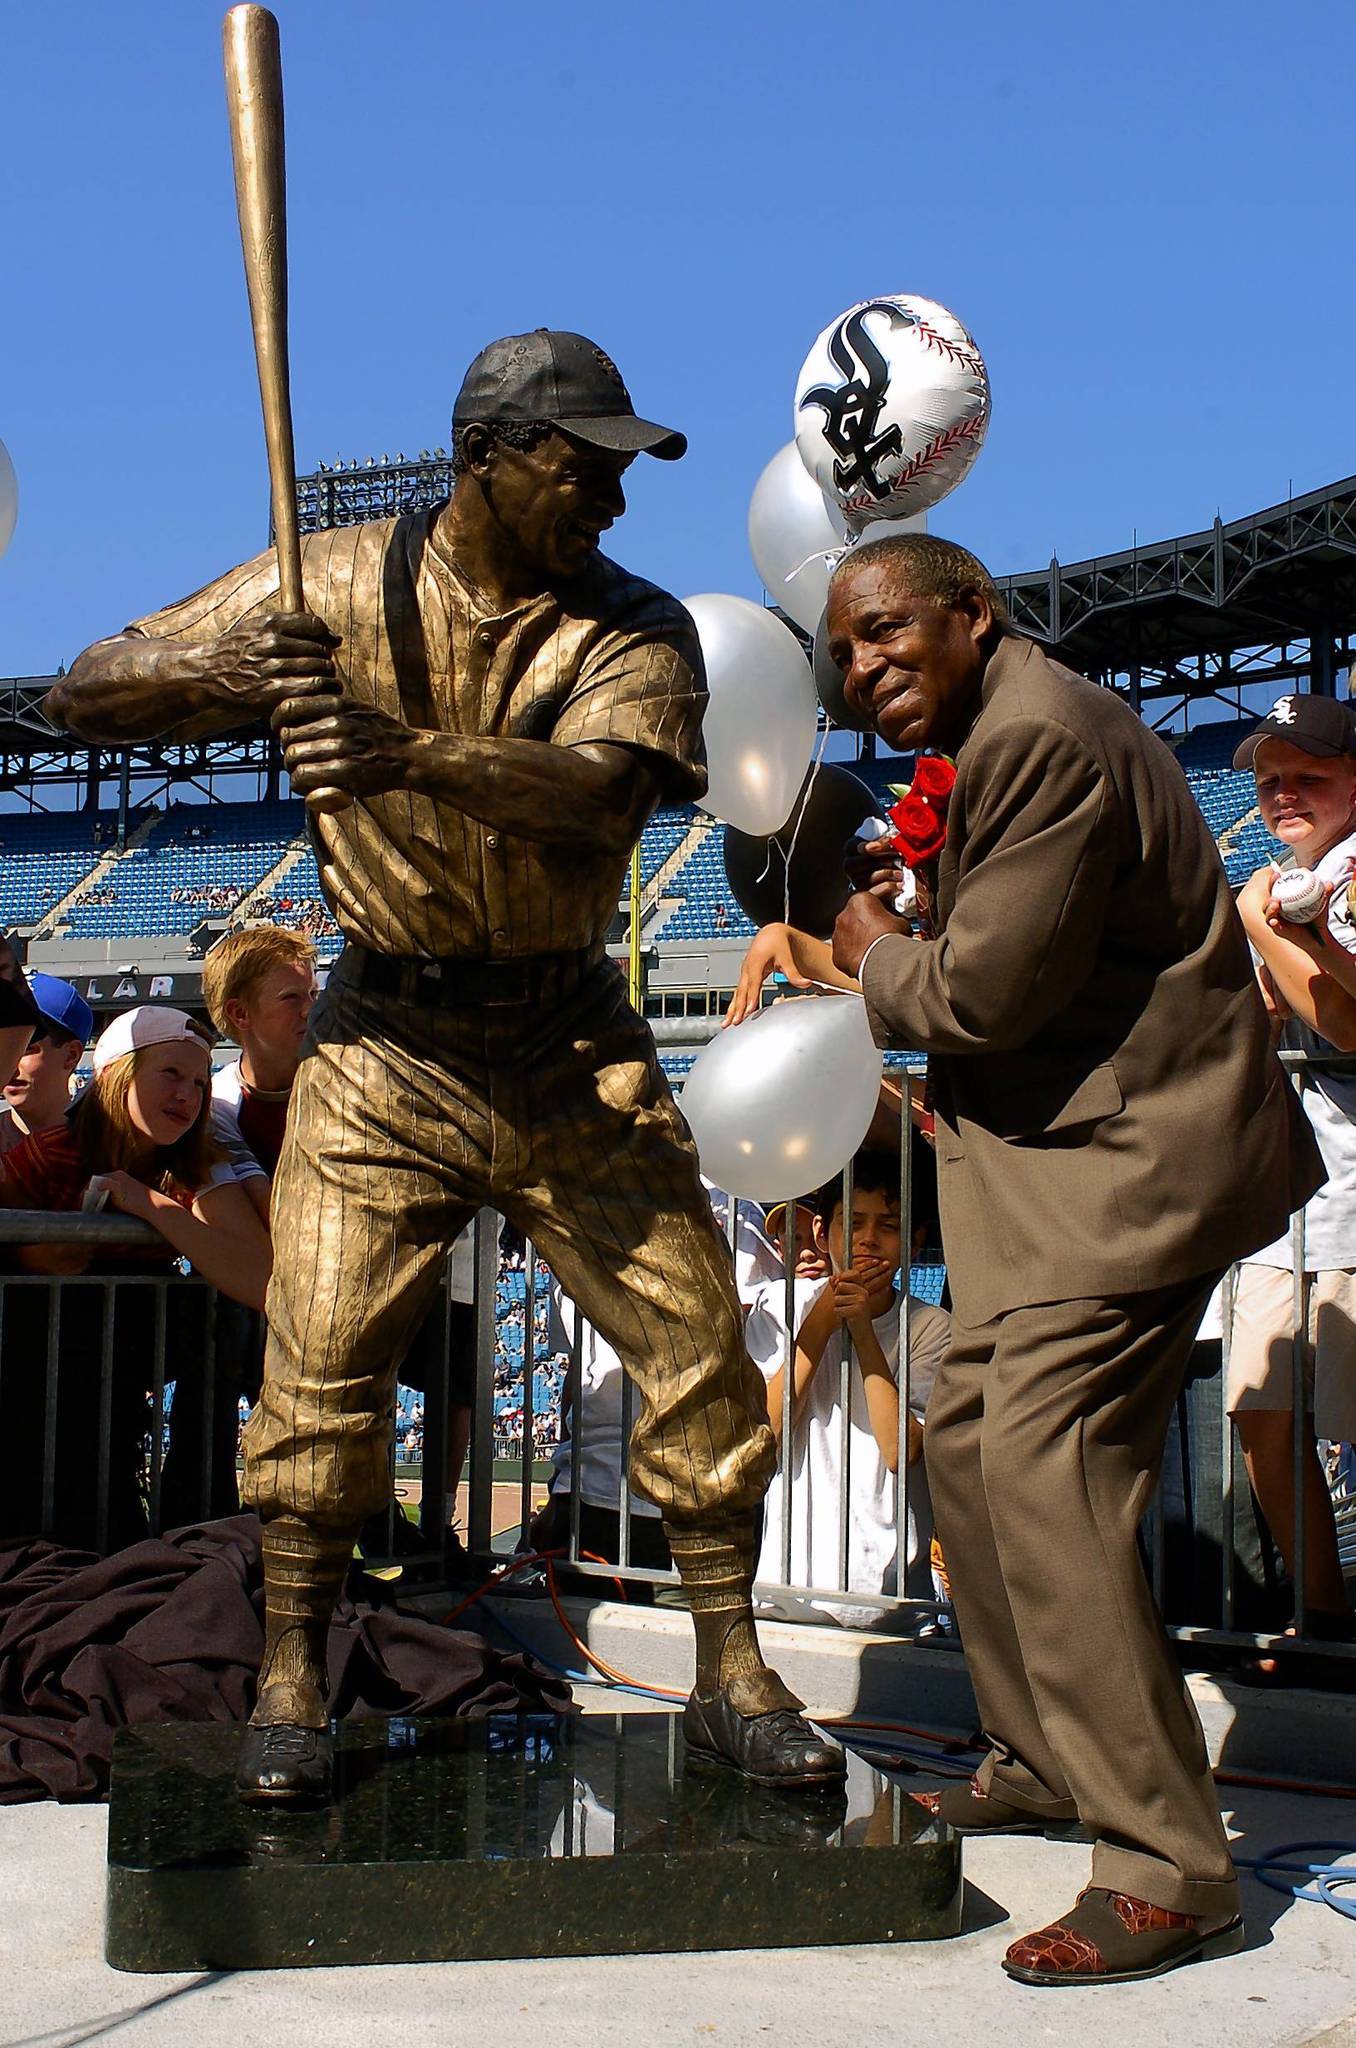 Cubs, White Sox To Honor Ernie Banks, Minnie Minoso With Throwback